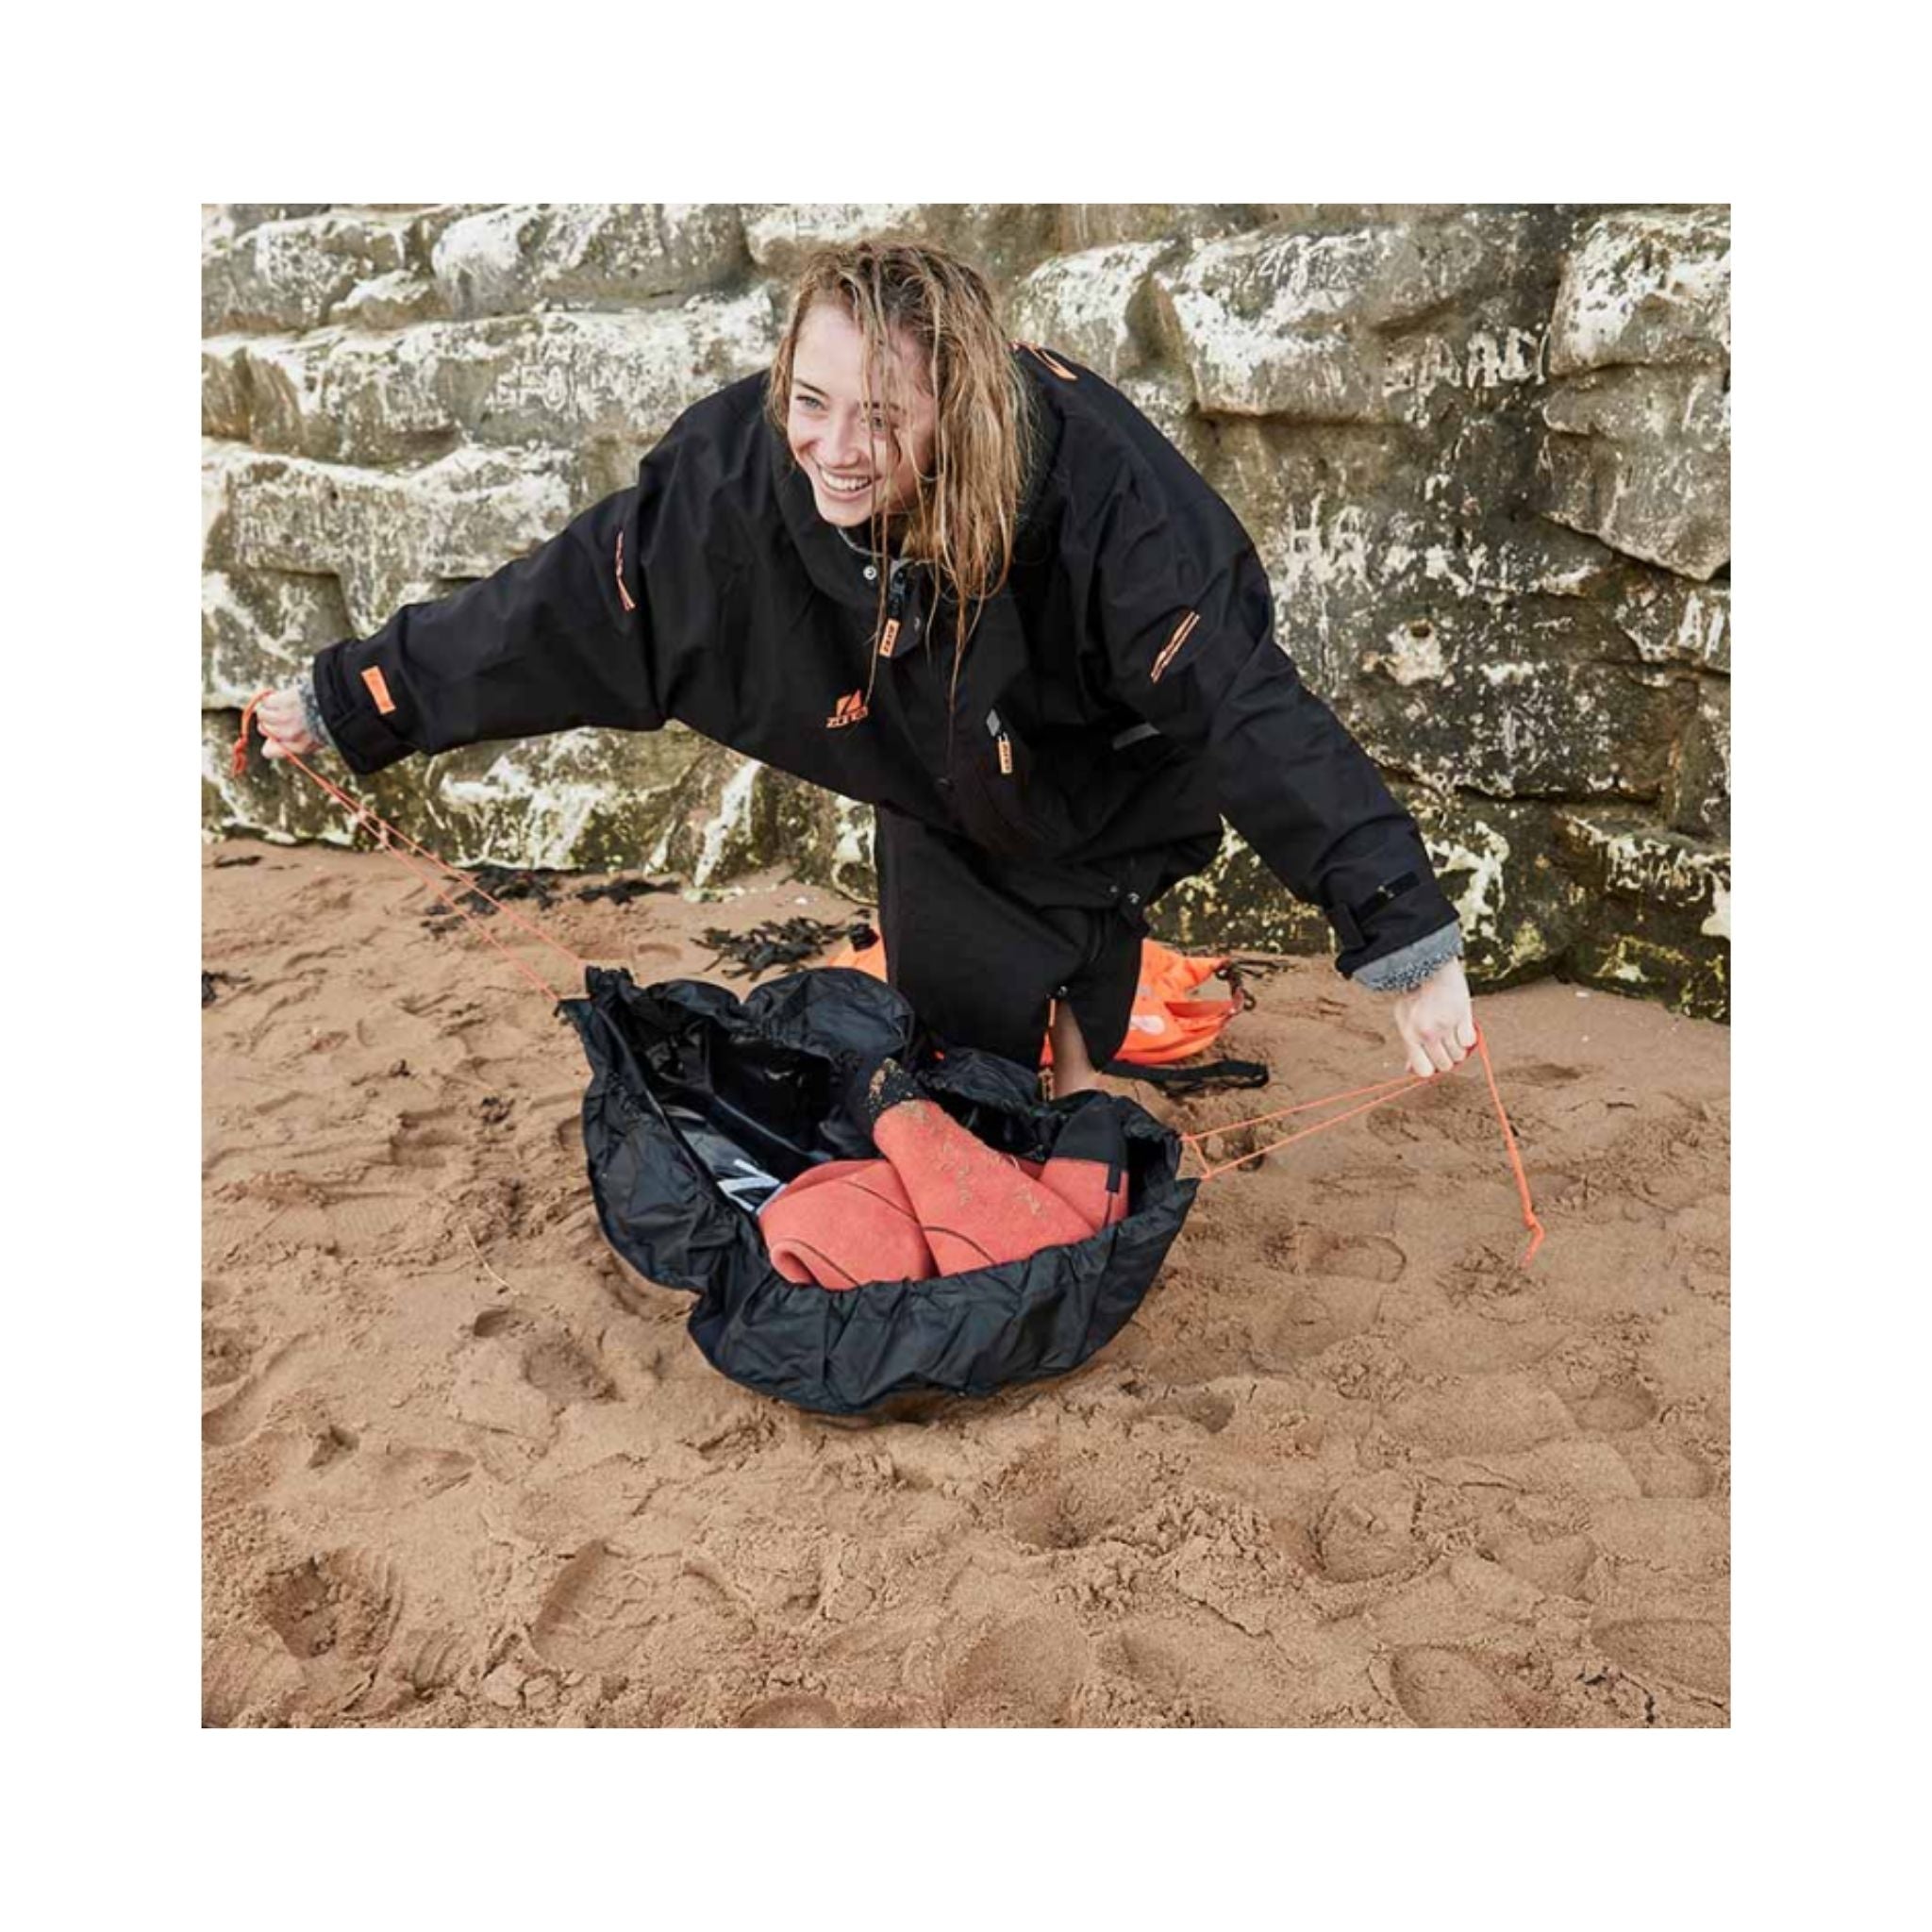 Zone3 Wetsuit Changing Mat | Zone 3 | Portwest - The Outdoor Shop